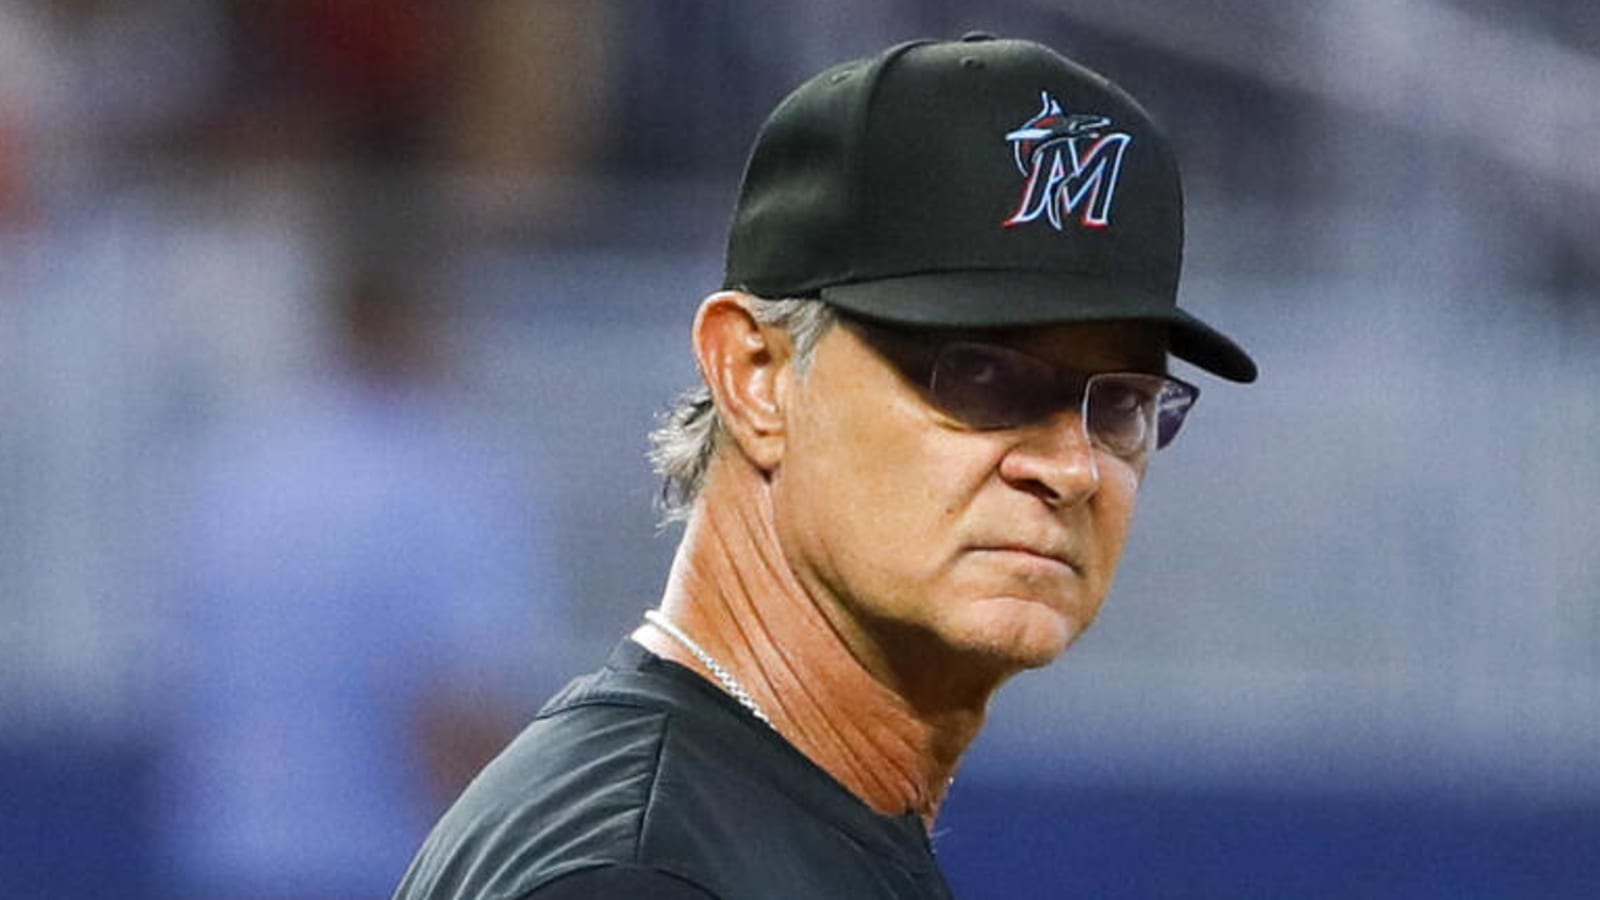 Don Mattingly returns to Miami with Blue Jays